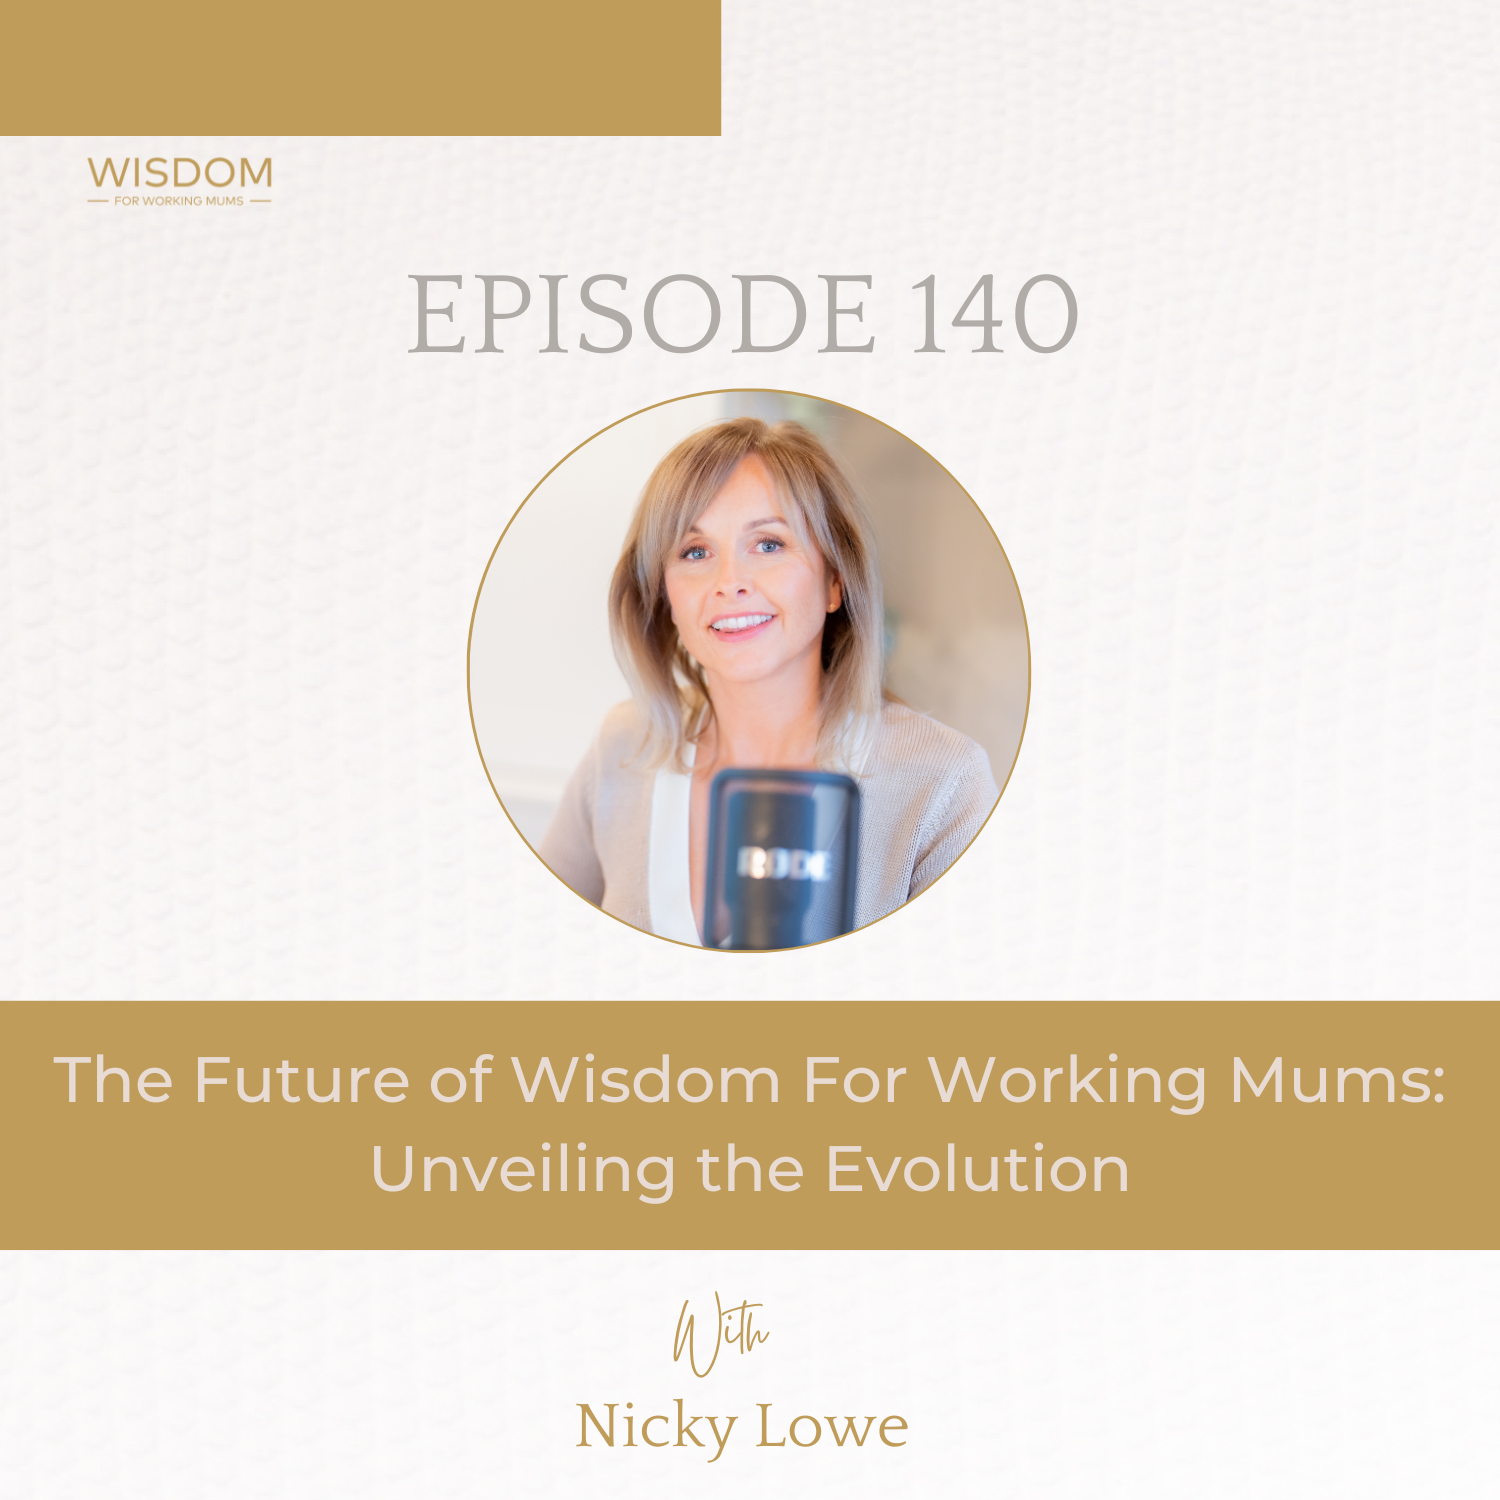 The Future of Wisdom For Working Mums: Unveiling the Evolution